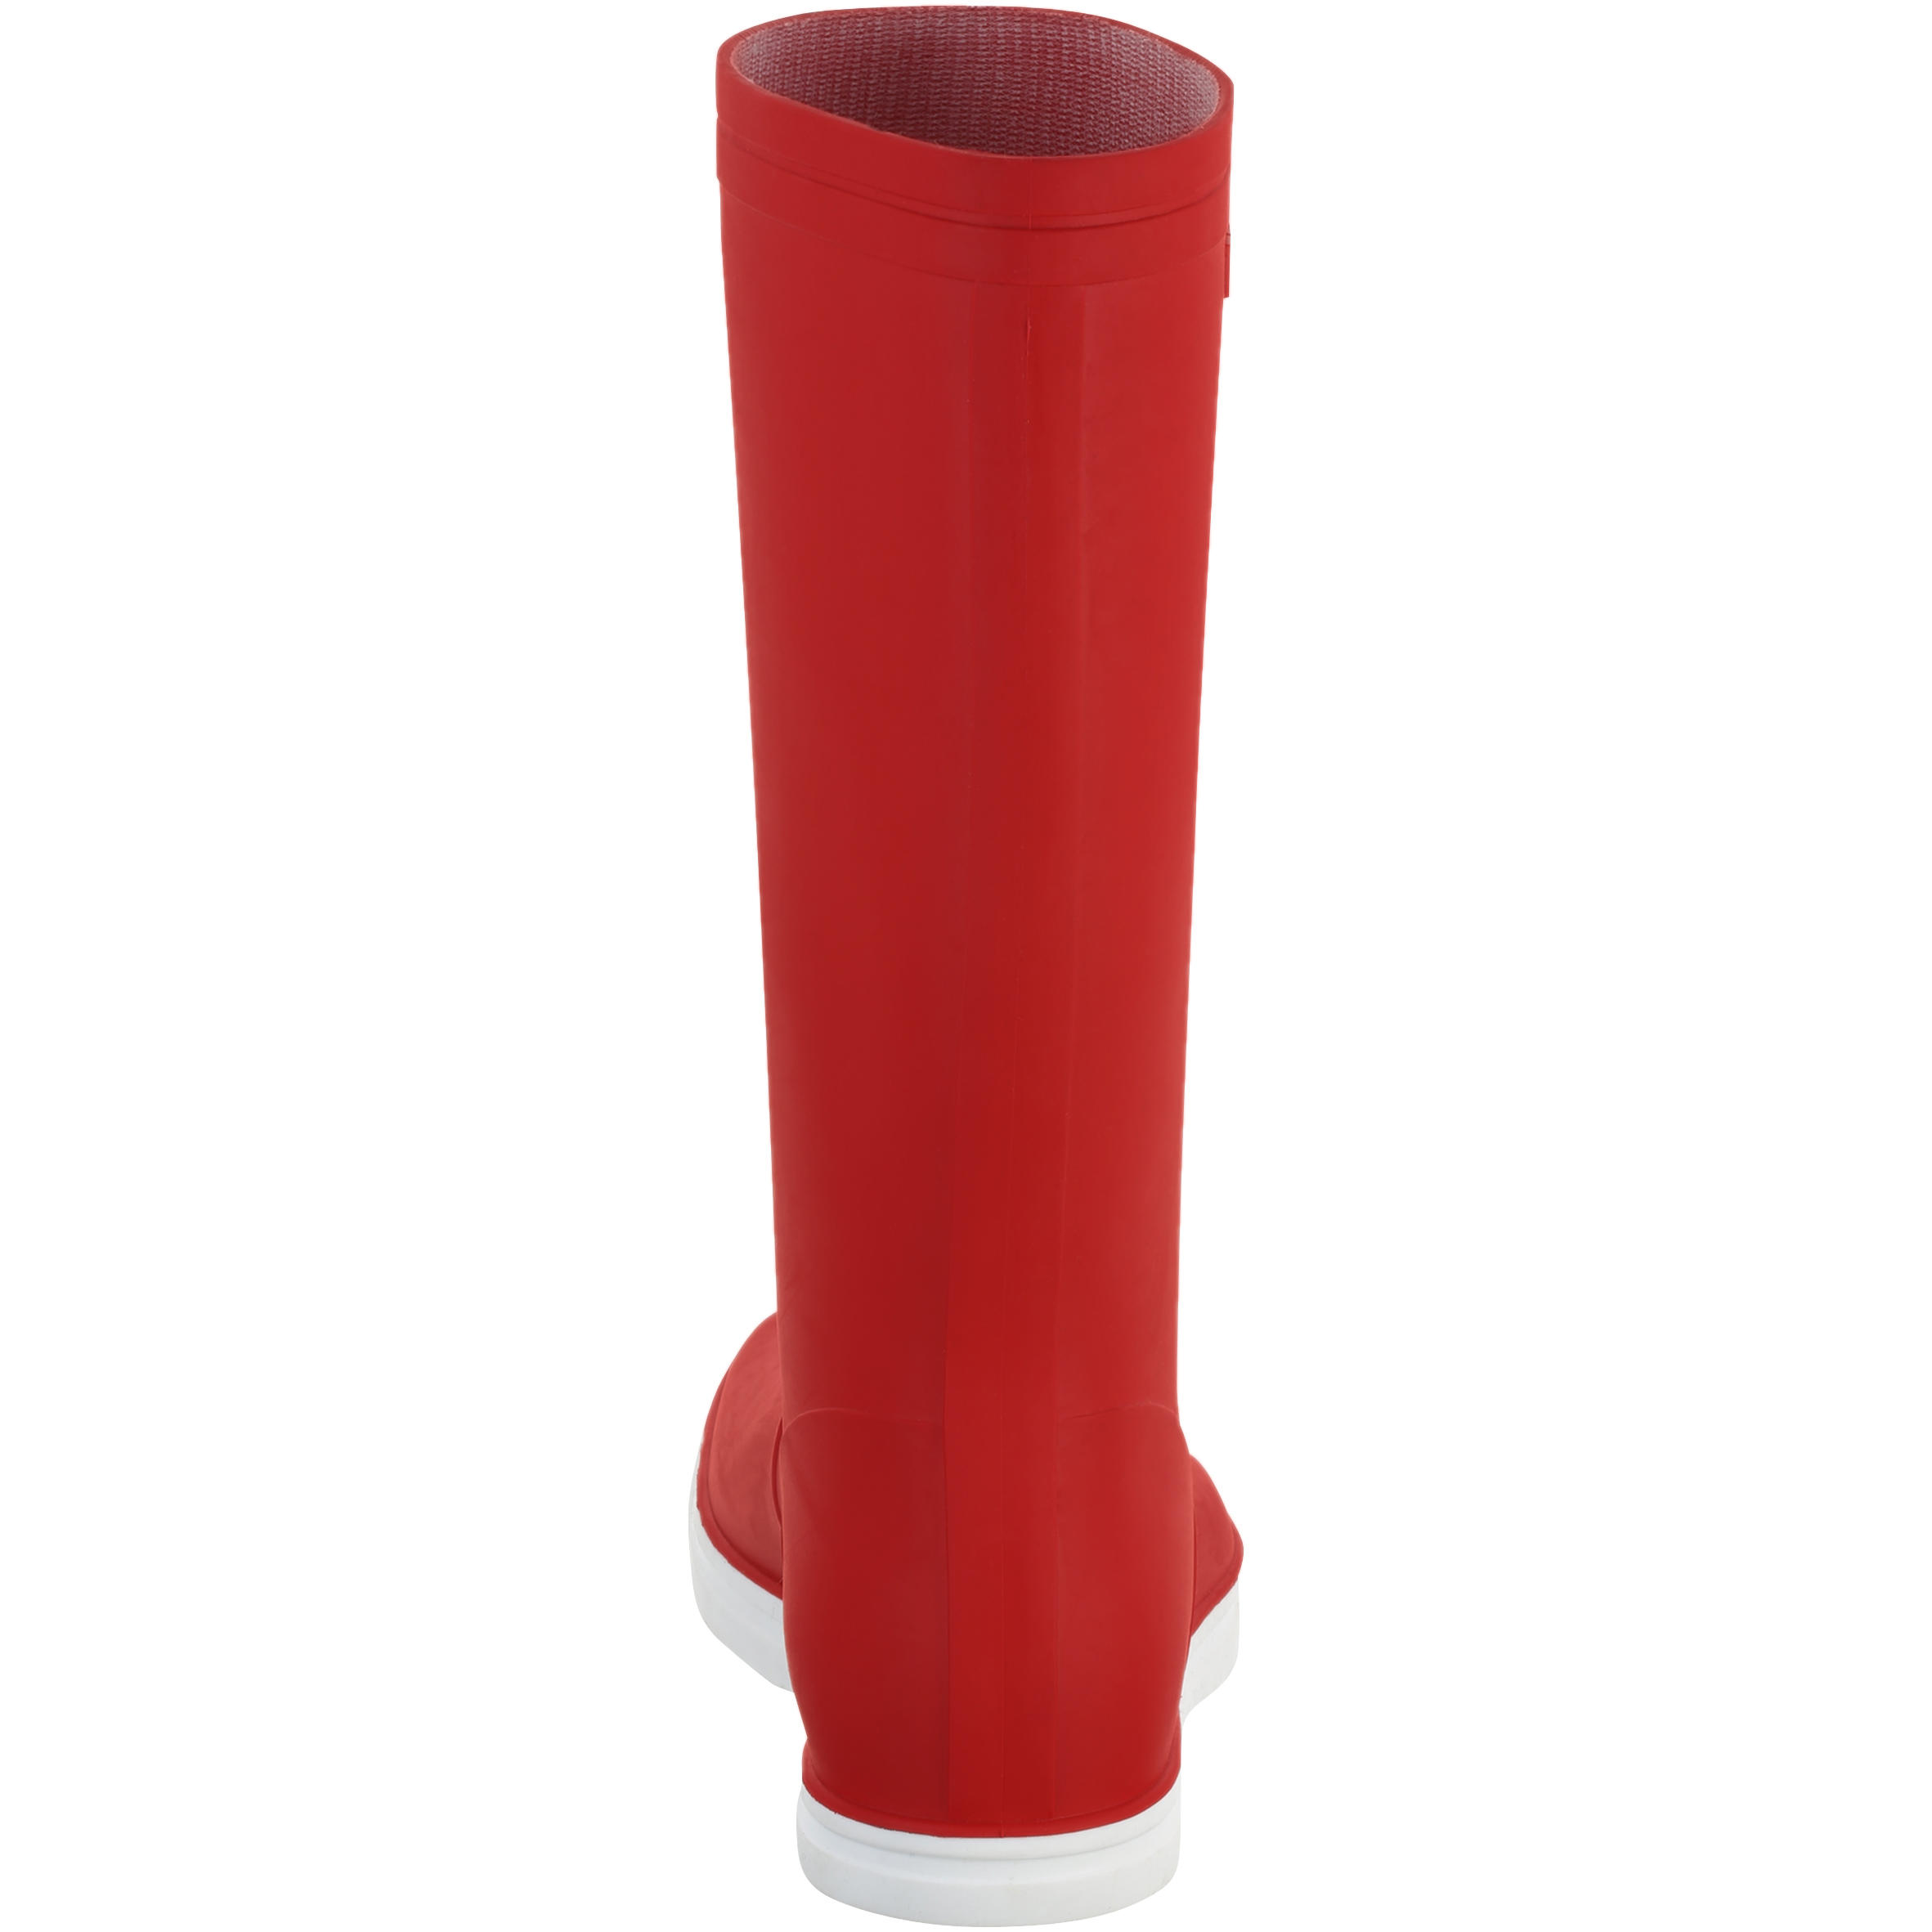 Sailing 100 Adult Wellies  - Red 6/12